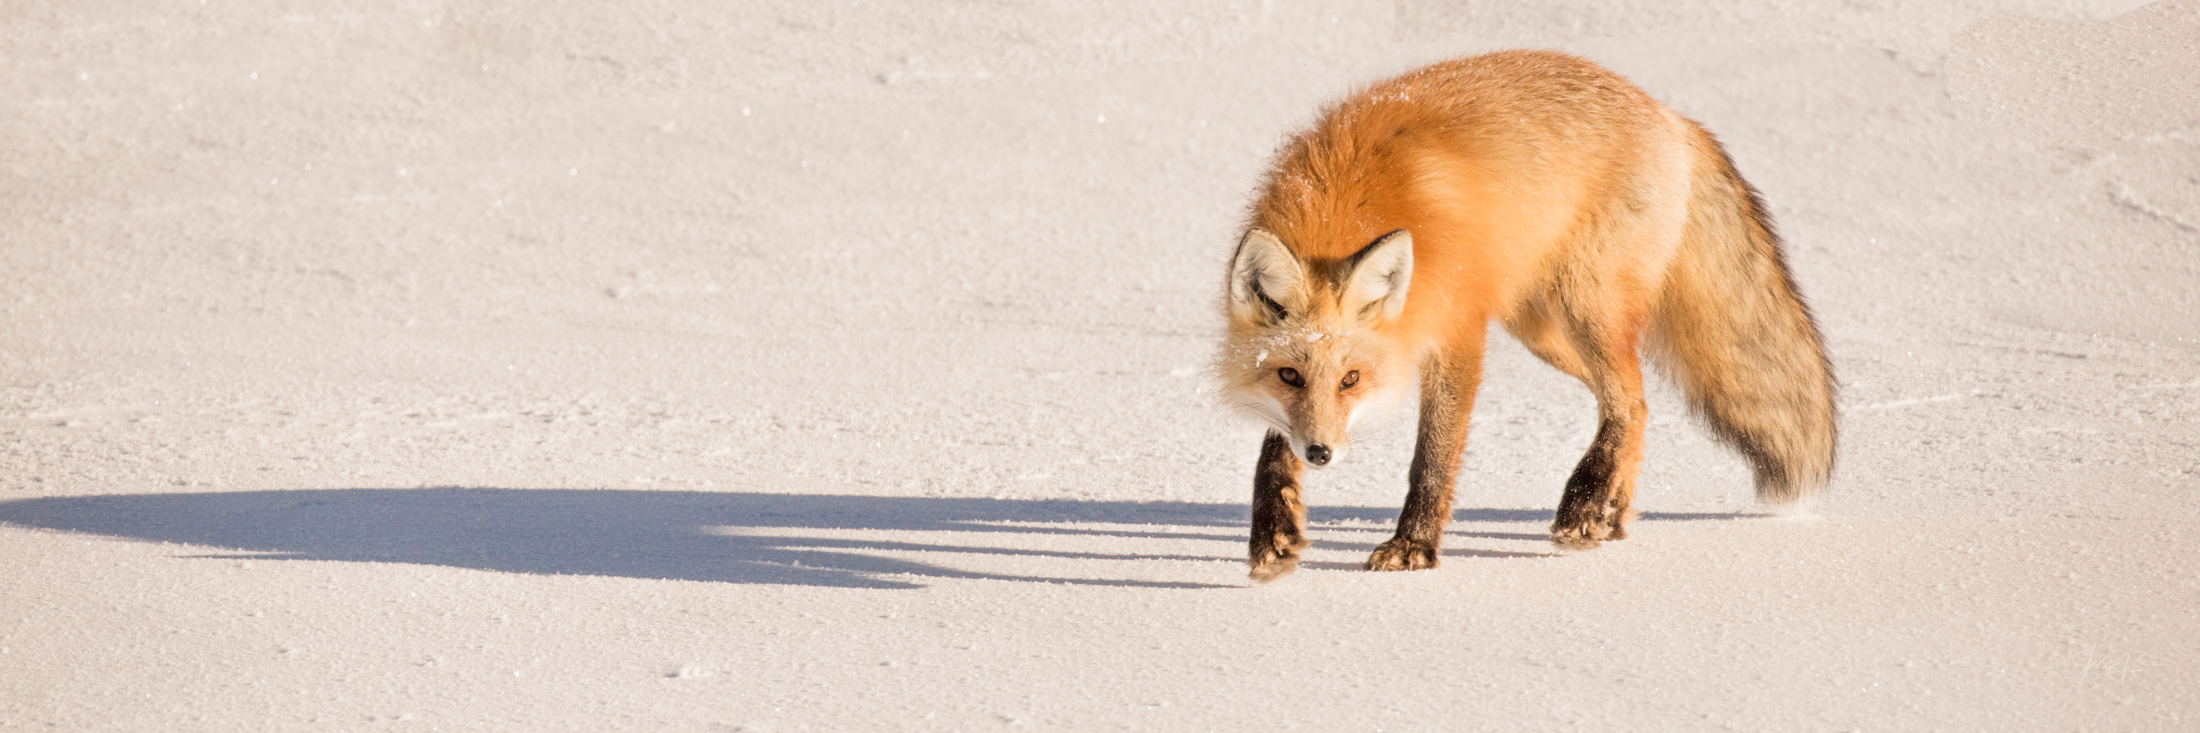 Fox Photo 20 is presented in Limited Edition of 250 Exclusive high-resolution Museum Quality Fine Art Prints. Wildlife Photo...